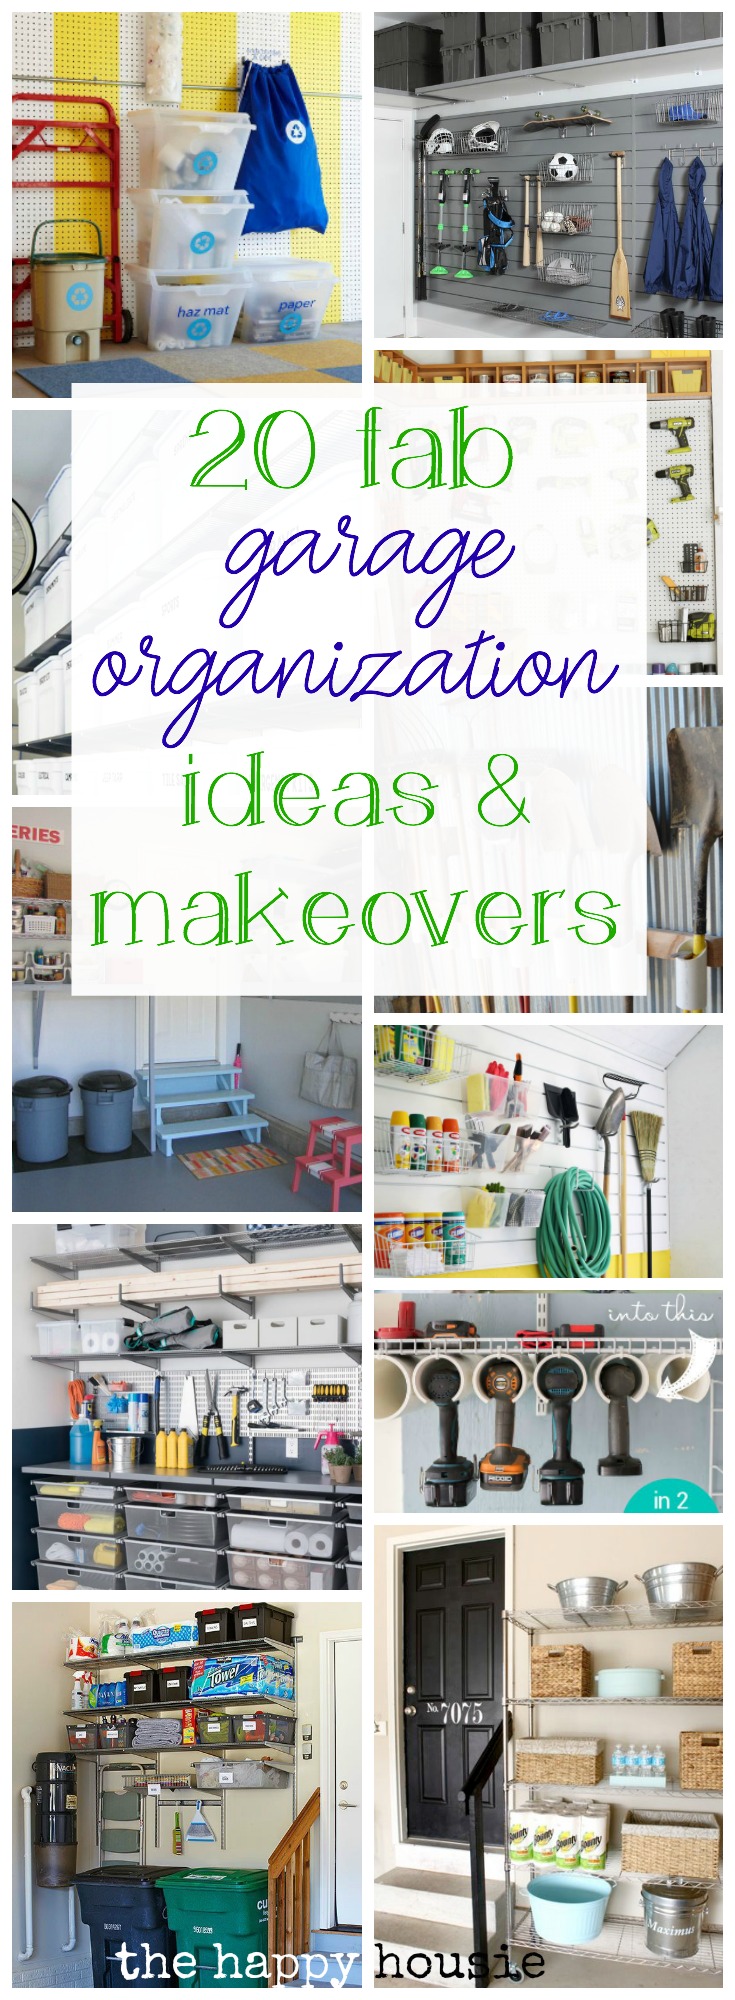 https://www.thehappyhousie.com/wp-content/uploads/2017/10/Get-your-garage-organized-once-and-for-all-with-these-20-fab-garage-organization-ideas-and-makeovers-.jpg